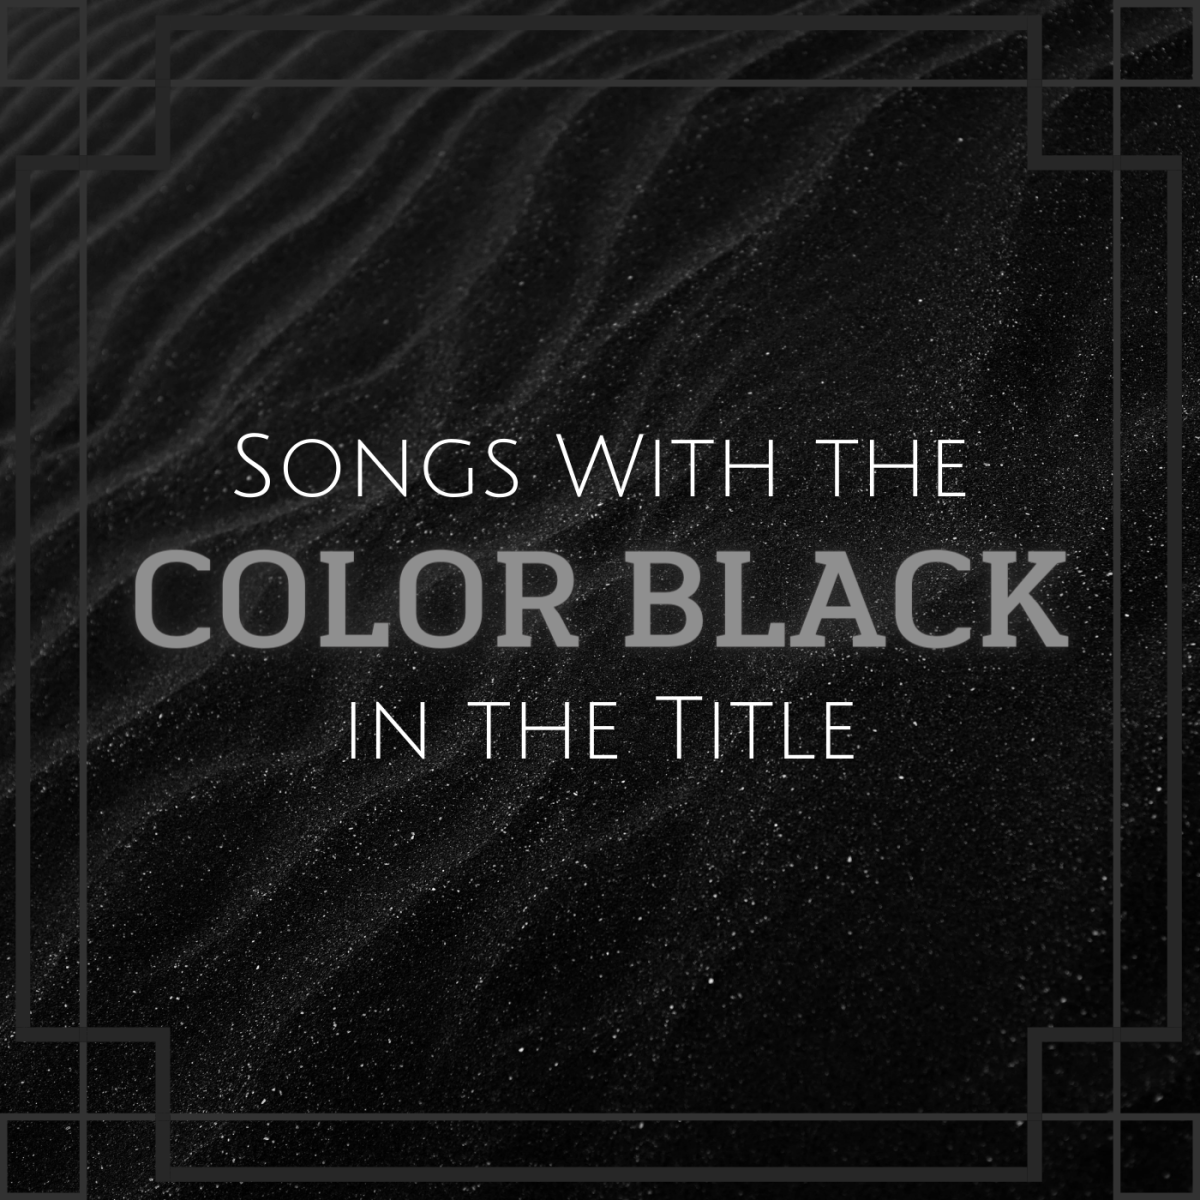 74 Songs With the Color Black in the Title